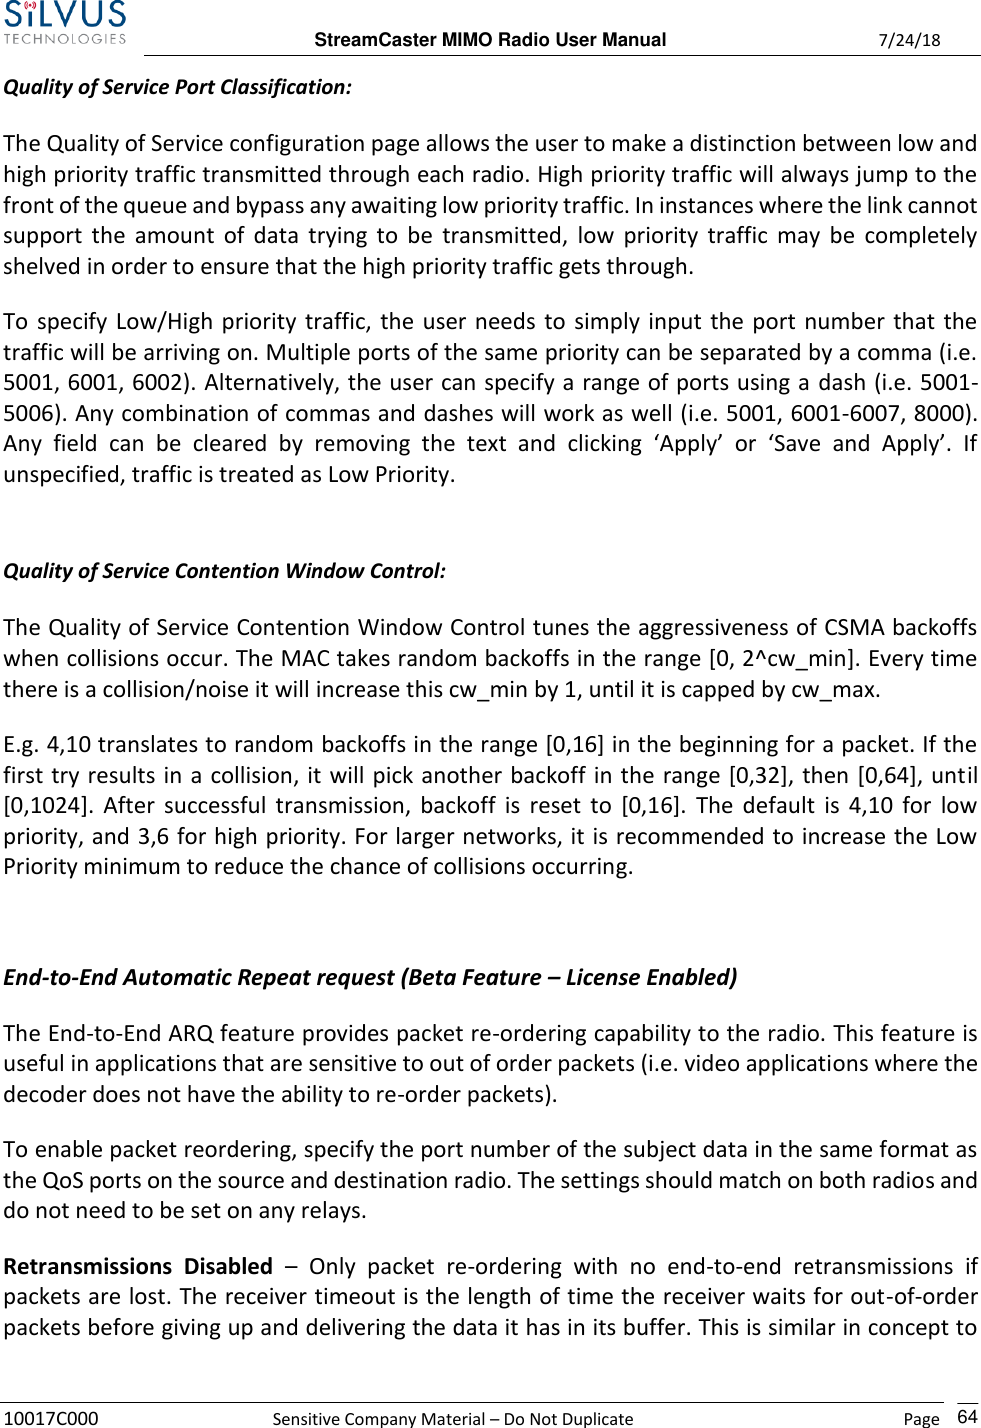  StreamCaster MIMO Radio User Manual  7/24/18 10017C000  Sensitive Company Material – Do Not Duplicate    Page    64 Quality of Service Port Classification: The Quality of Service configuration page allows the user to make a distinction between low and high priority traffic transmitted through each radio. High priority traffic will always jump to the front of the queue and bypass any awaiting low priority traffic. In instances where the link cannot support the amount  of  data trying to  be  transmitted, low priority  traffic may  be  completely shelved in order to ensure that the high priority traffic gets through.   To specify Low/High priority traffic, the user needs to simply input the port number that the traffic will be arriving on. Multiple ports of the same priority can be separated by a comma (i.e. 5001, 6001, 6002). Alternatively, the user can specify a range of ports using a dash (i.e. 5001-5006). Any combination of commas and dashes will work as well (i.e. 5001, 6001-6007, 8000). Any  field  can  be  cleared  by  removing  the  text  and  clicking  ‘Apply’  or  ‘Save  and  Apply’.  If unspecified, traffic is treated as Low Priority.  Quality of Service Contention Window Control: The Quality of Service Contention Window Control tunes the aggressiveness of CSMA backoffs when collisions occur. The MAC takes random backoffs in the range [0, 2^cw_min]. Every time there is a collision/noise it will increase this cw_min by 1, until it is capped by cw_max. E.g. 4,10 translates to random backoffs in the range [0,16] in the beginning for a packet. If the first try results in a collision, it will pick another backoff in the range [0,32], then [0,64], until [0,1024]. After  successful transmission, backoff  is reset to  [0,16]. The  default is 4,10 for low priority, and 3,6 for high priority. For larger networks, it is recommended to increase the Low Priority minimum to reduce the chance of collisions occurring.  End-to-End Automatic Repeat request (Beta Feature – License Enabled) The End-to-End ARQ feature provides packet re-ordering capability to the radio. This feature is useful in applications that are sensitive to out of order packets (i.e. video applications where the decoder does not have the ability to re-order packets).  To enable packet reordering, specify the port number of the subject data in the same format as the QoS ports on the source and destination radio. The settings should match on both radios and do not need to be set on any relays. Retransmissions  Disabled –  Only  packet  re-ordering  with  no  end-to-end  retransmissions  if packets are lost. The receiver timeout is the length of time the receiver waits for out-of-order packets before giving up and delivering the data it has in its buffer. This is similar in concept to 